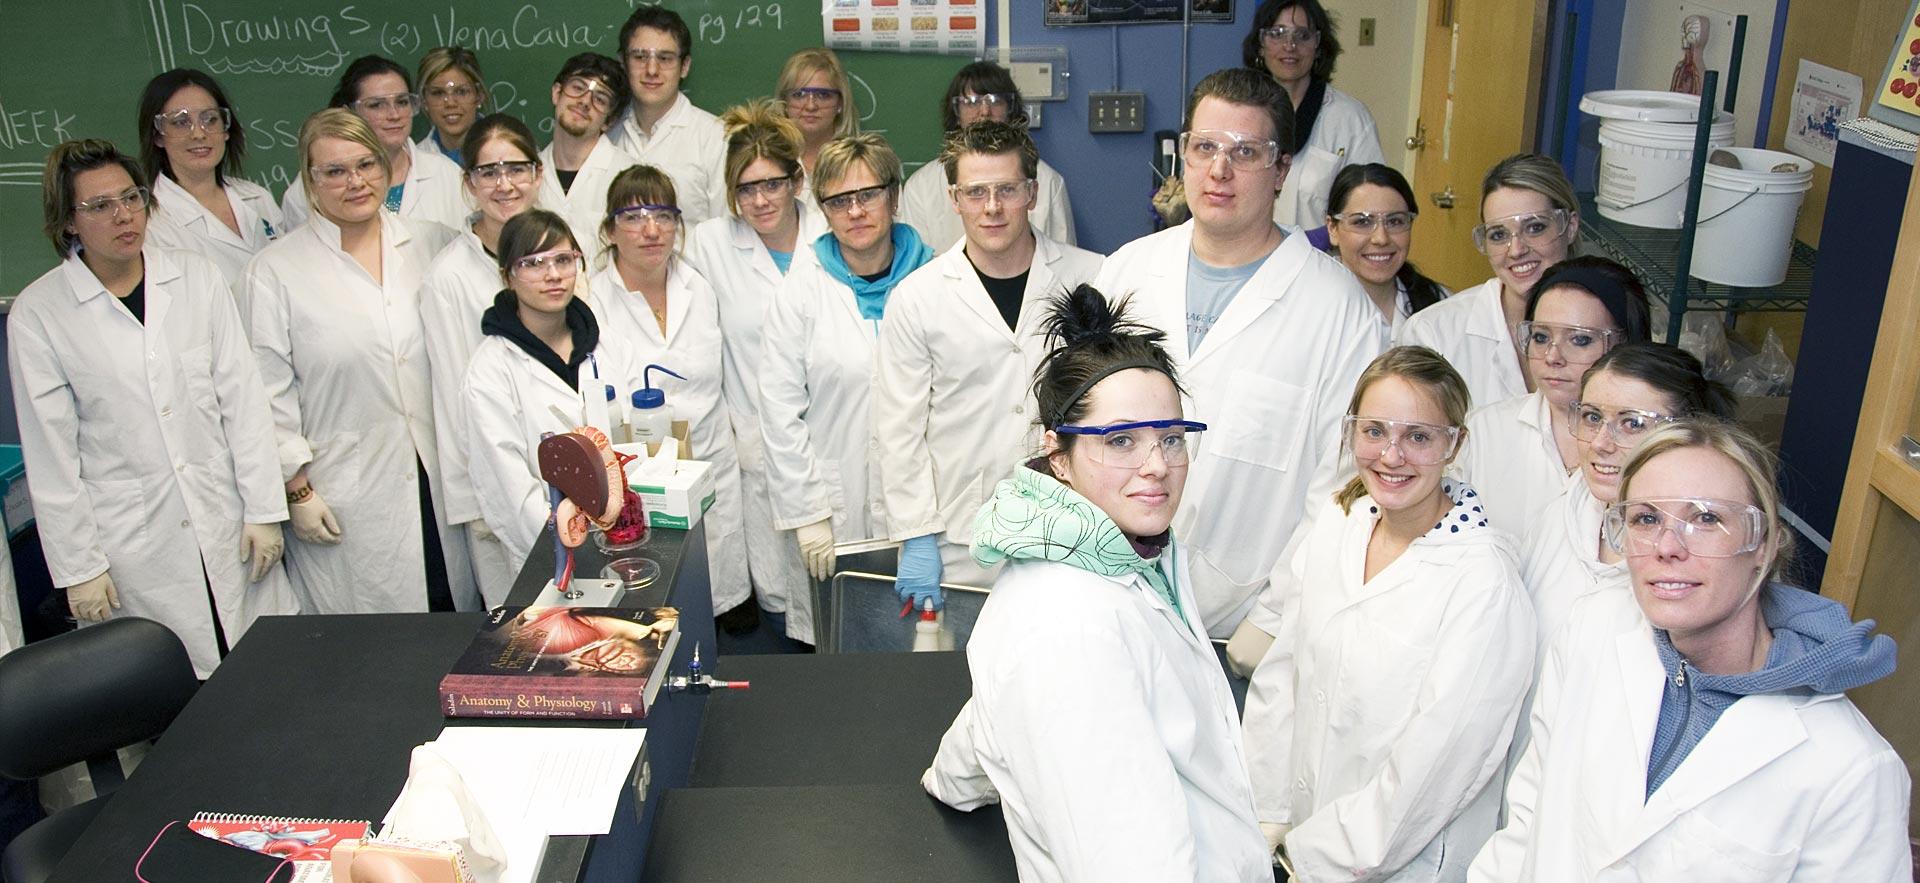 Nursing class in lab coats smile for photo.